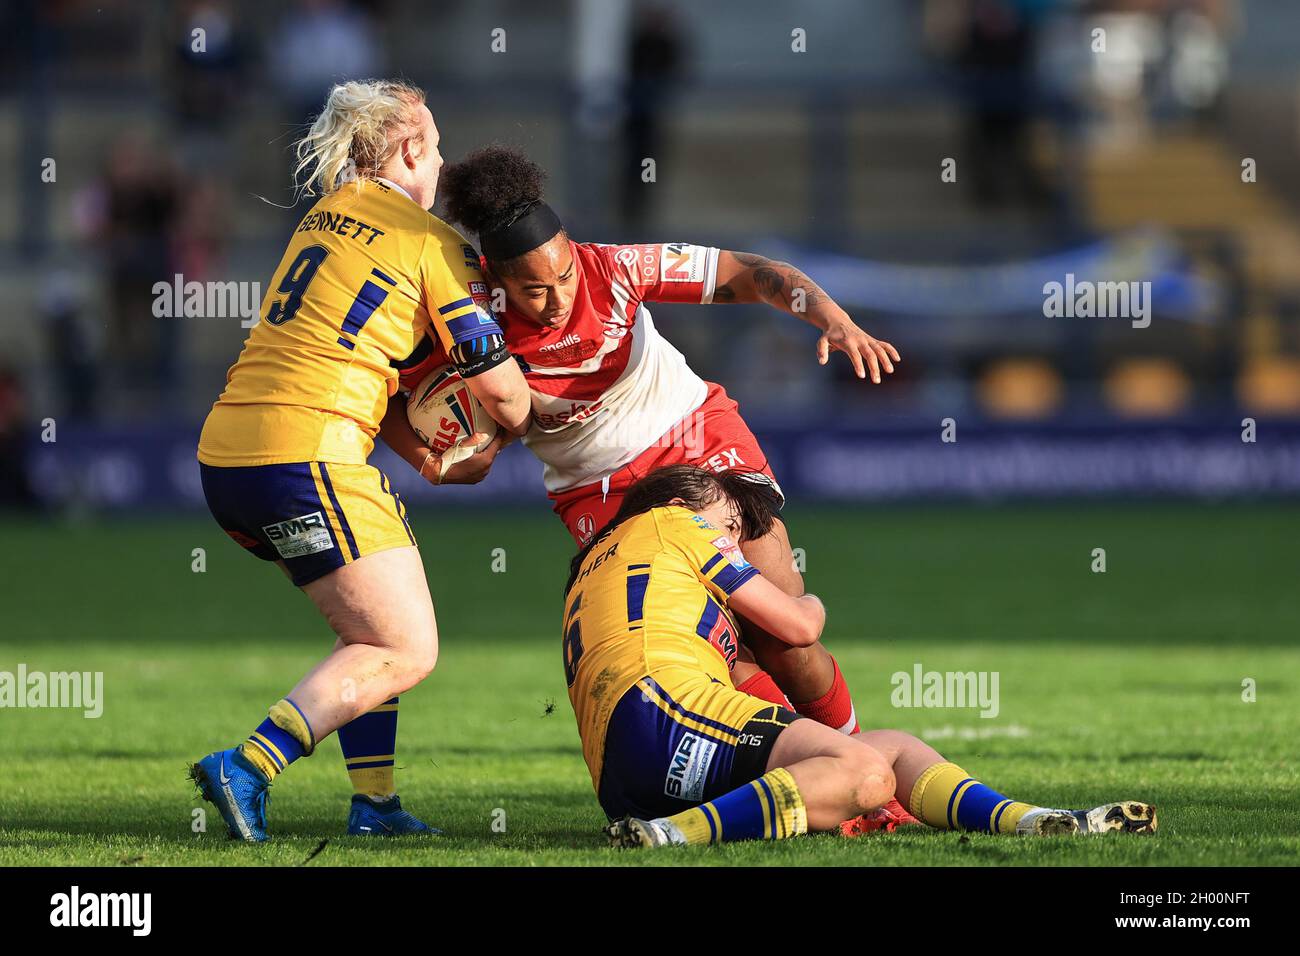 Leeds, UK. 10th Oct, 2021. Chantelle Crowl #13 of St Helens is tackled by Keara Bennett #9 of Leeds Rhinos and Hanna Butcher #6 of Leeds Rhinos in Leeds, United Kingdom on 10/10/2021. (Photo by Mark Cosgrove/News Images/Sipa USA) Credit: Sipa USA/Alamy Live News Stock Photo